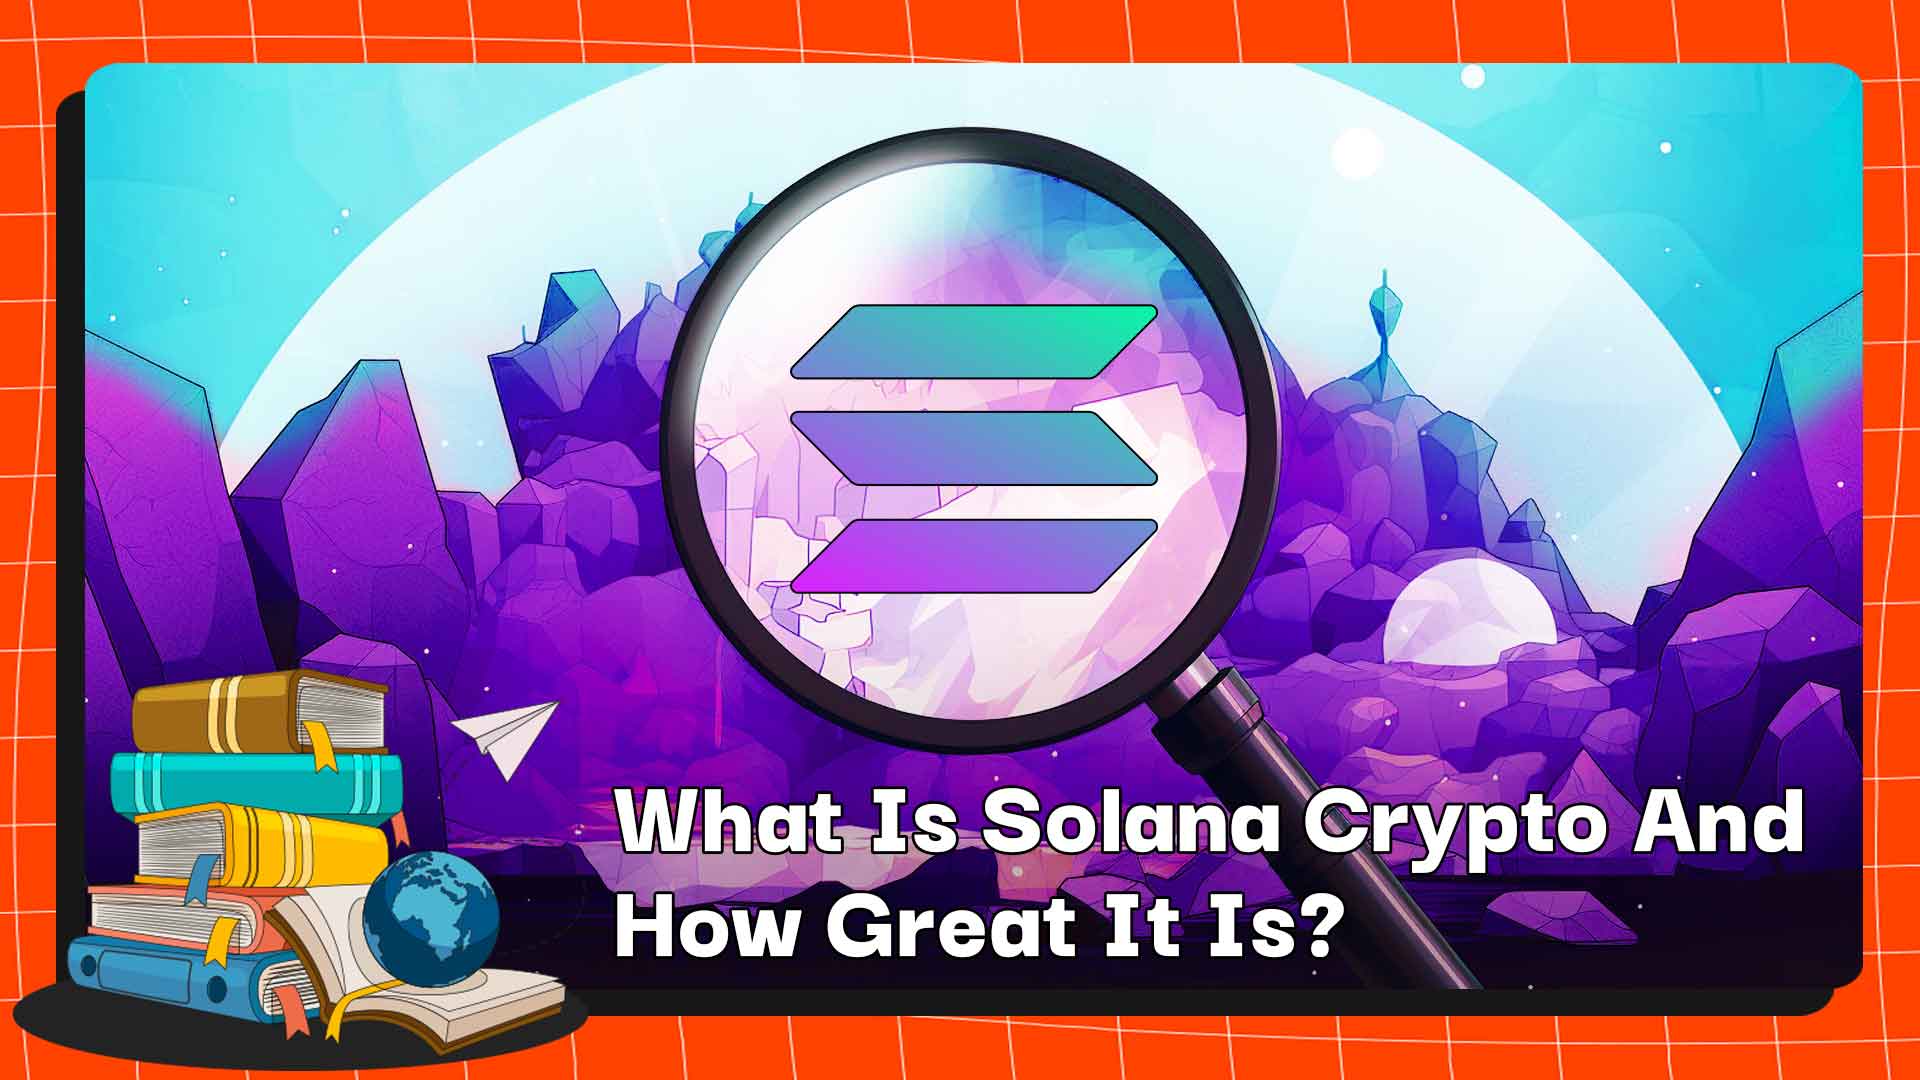 Solana crypto and how great it is! Beyond the hidden gems!